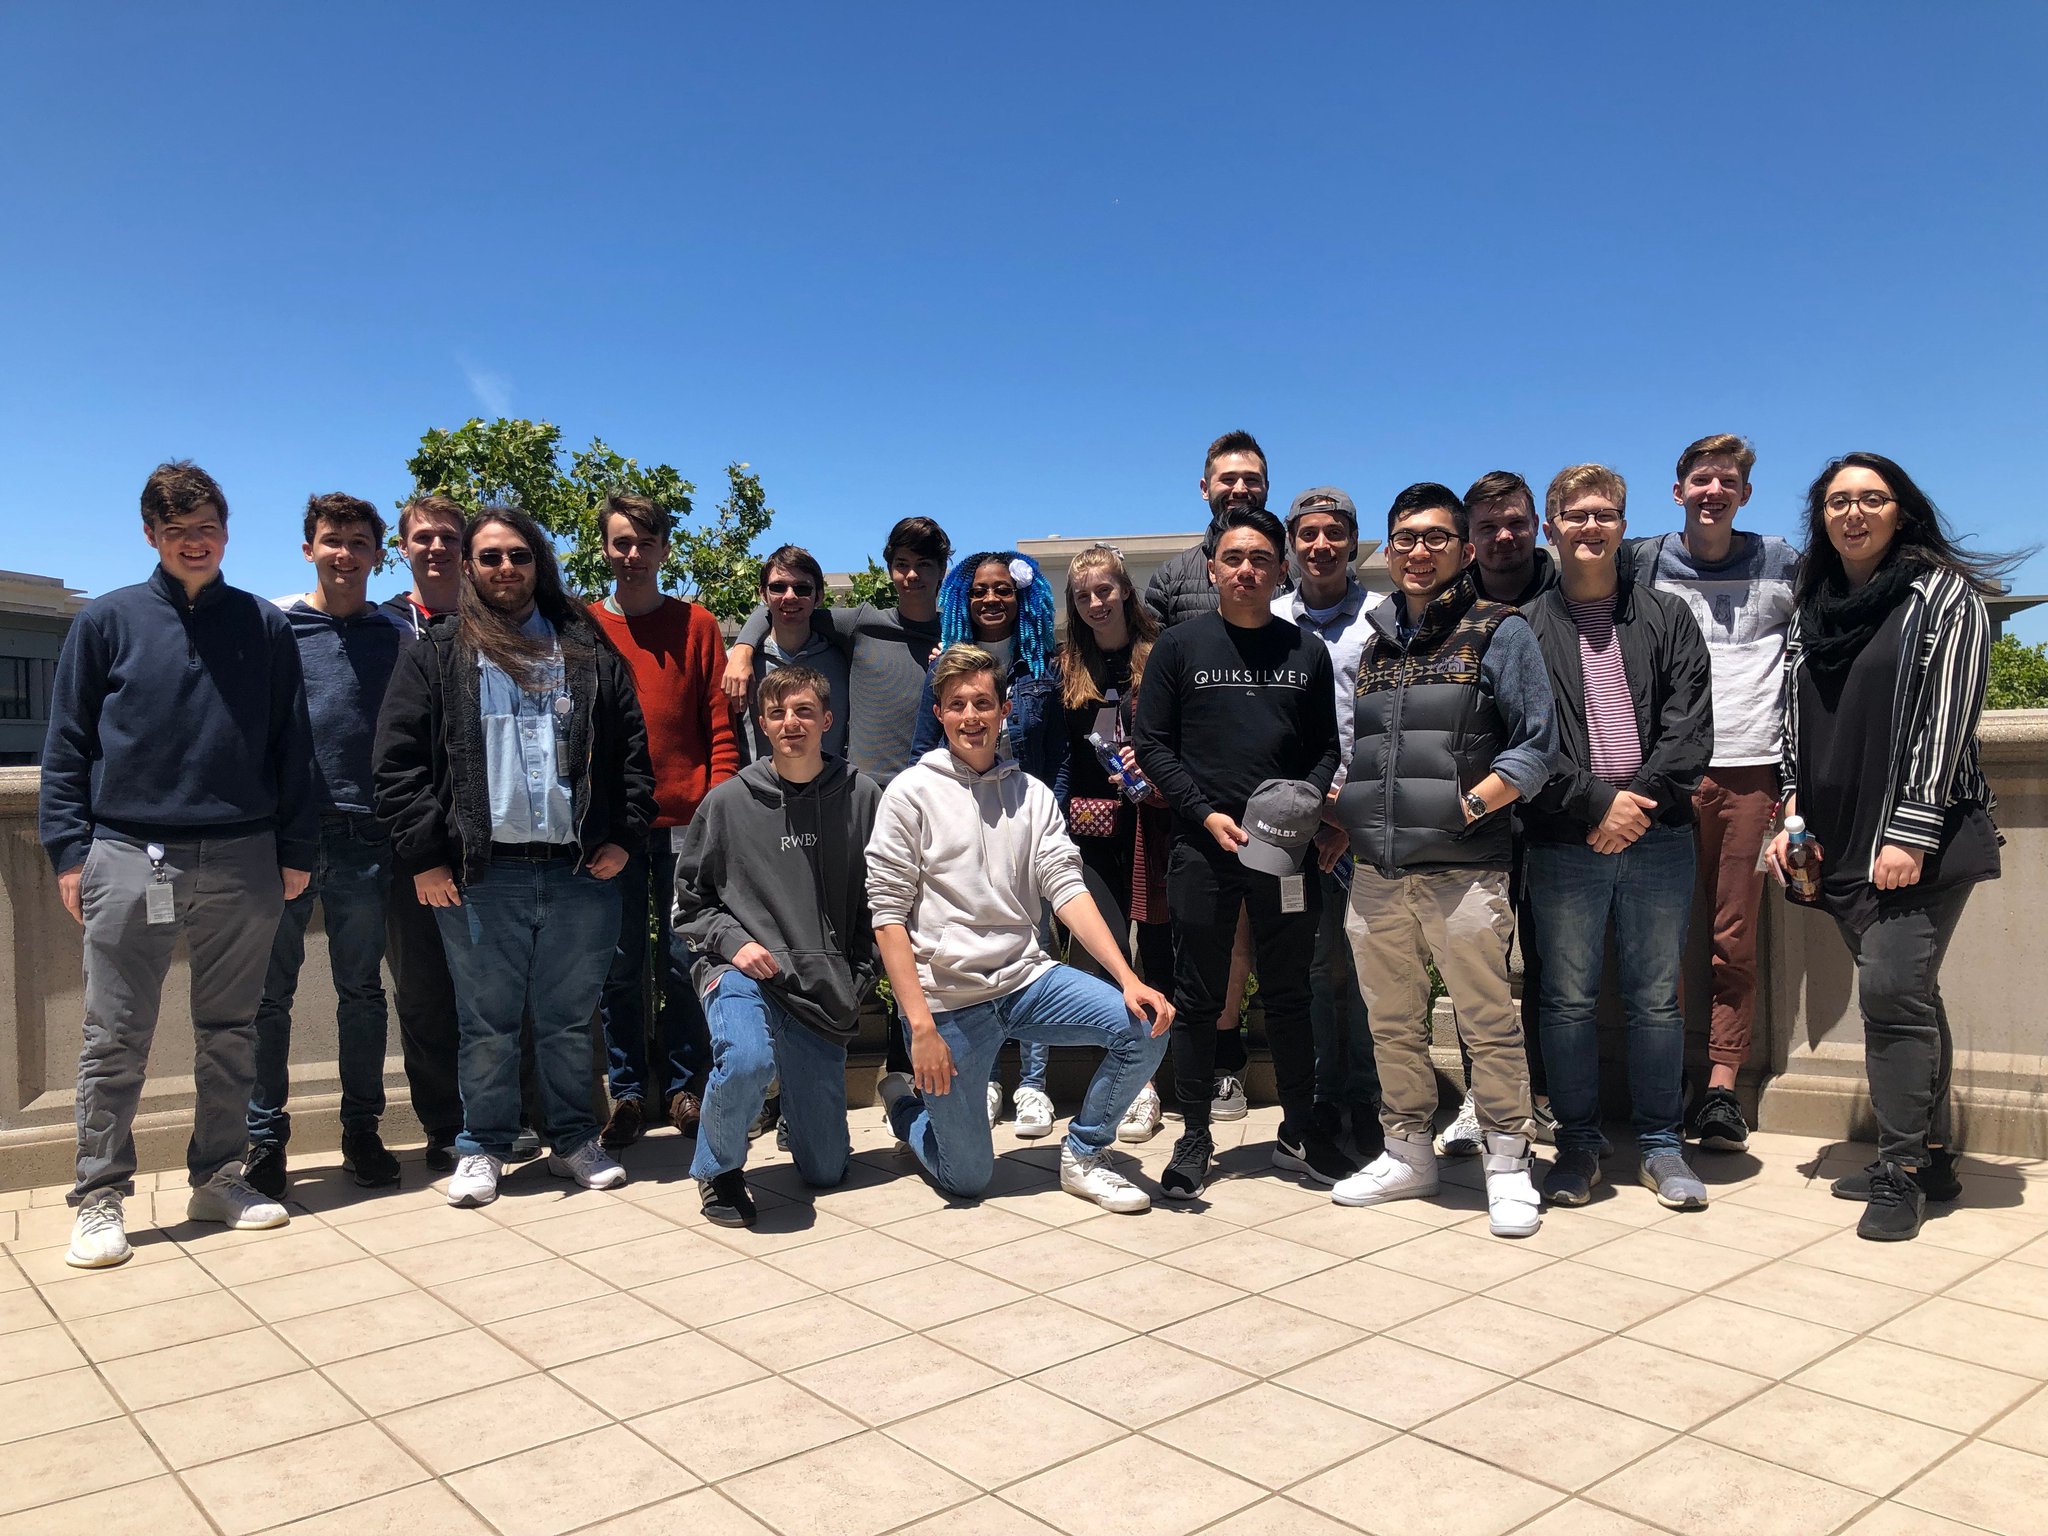 Roblox On Twitter The Future Is Here Wish Our Summer Accelerator Interns Good Luck What Will They Build Robloxdevrel Robloxdev Roblox Https T Co Wkrzt4odmb - intern fired from roblox